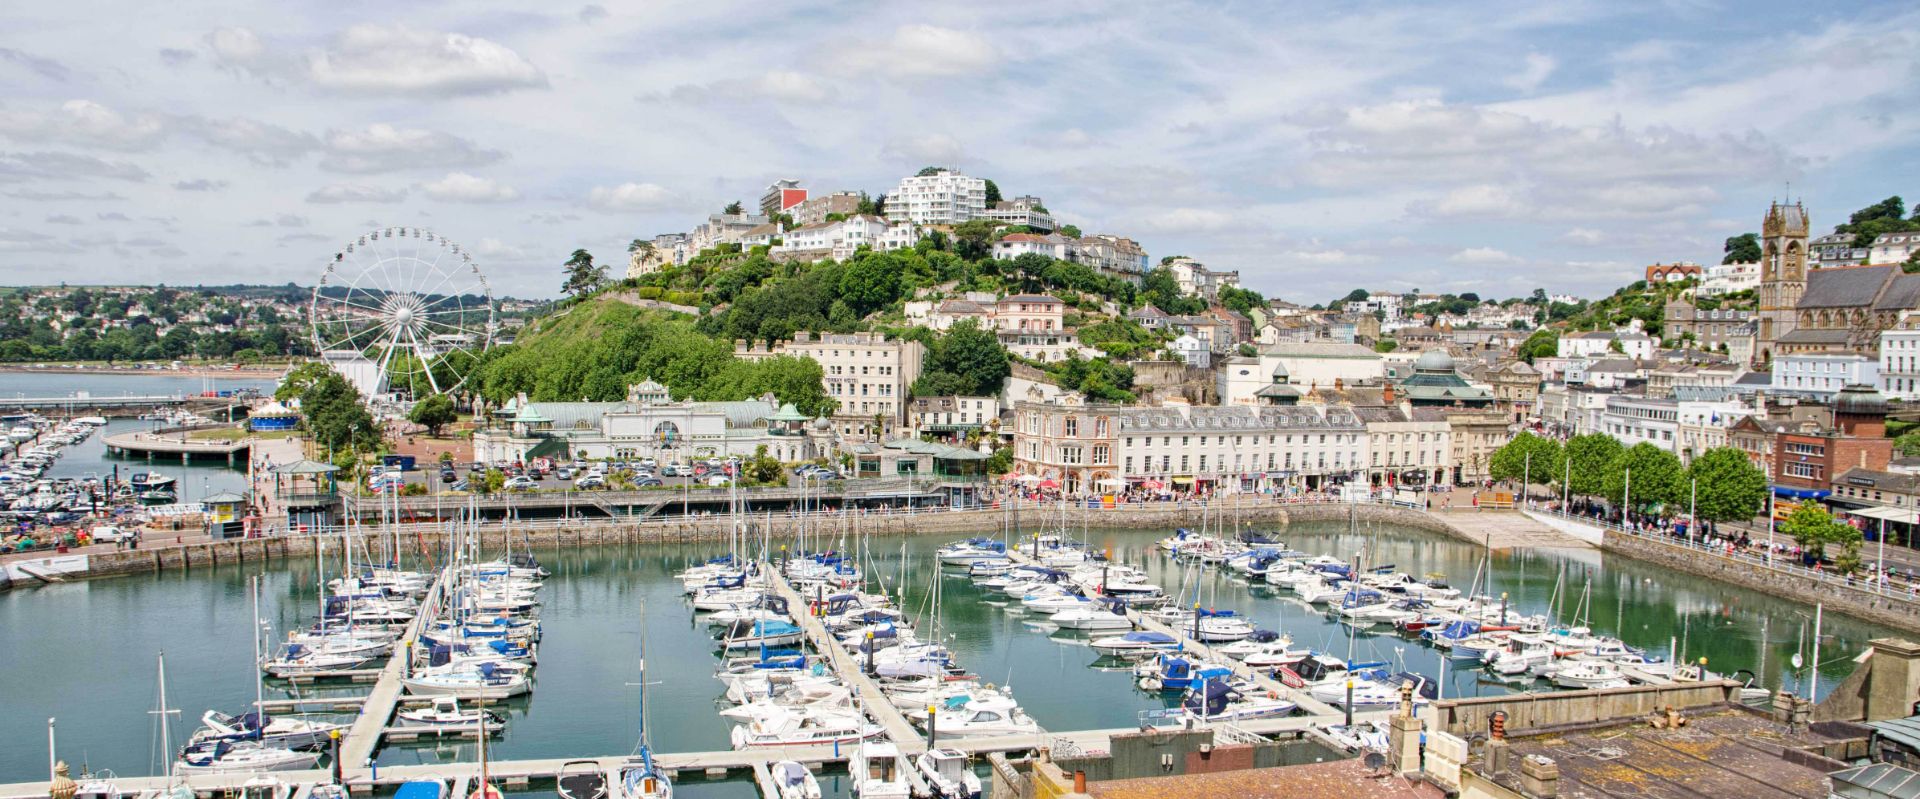 This is the view of Torquay Harbour